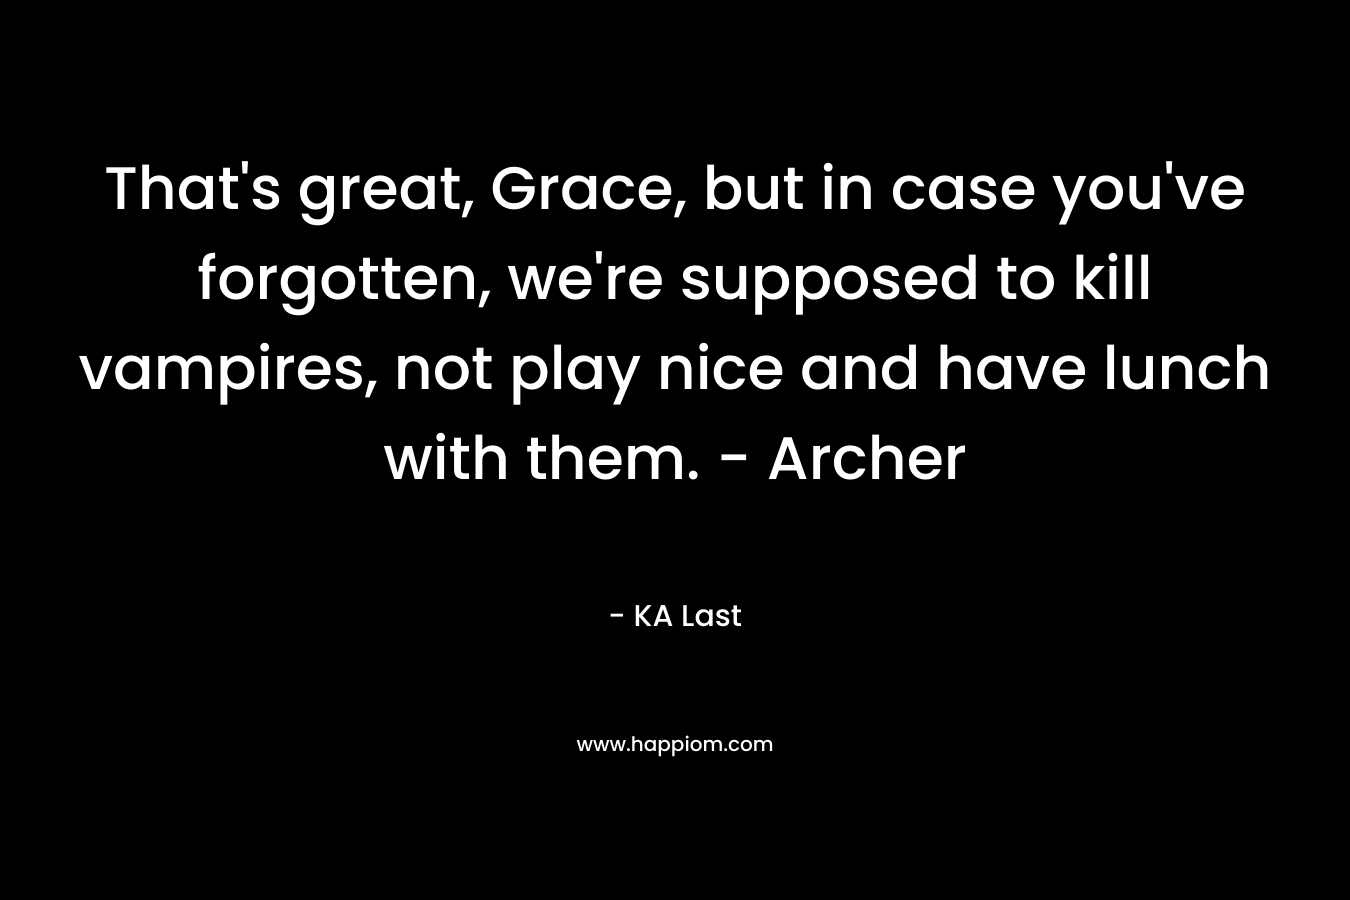 That's great, Grace, but in case you've forgotten, we're supposed to kill vampires, not play nice and have lunch with them. - Archer